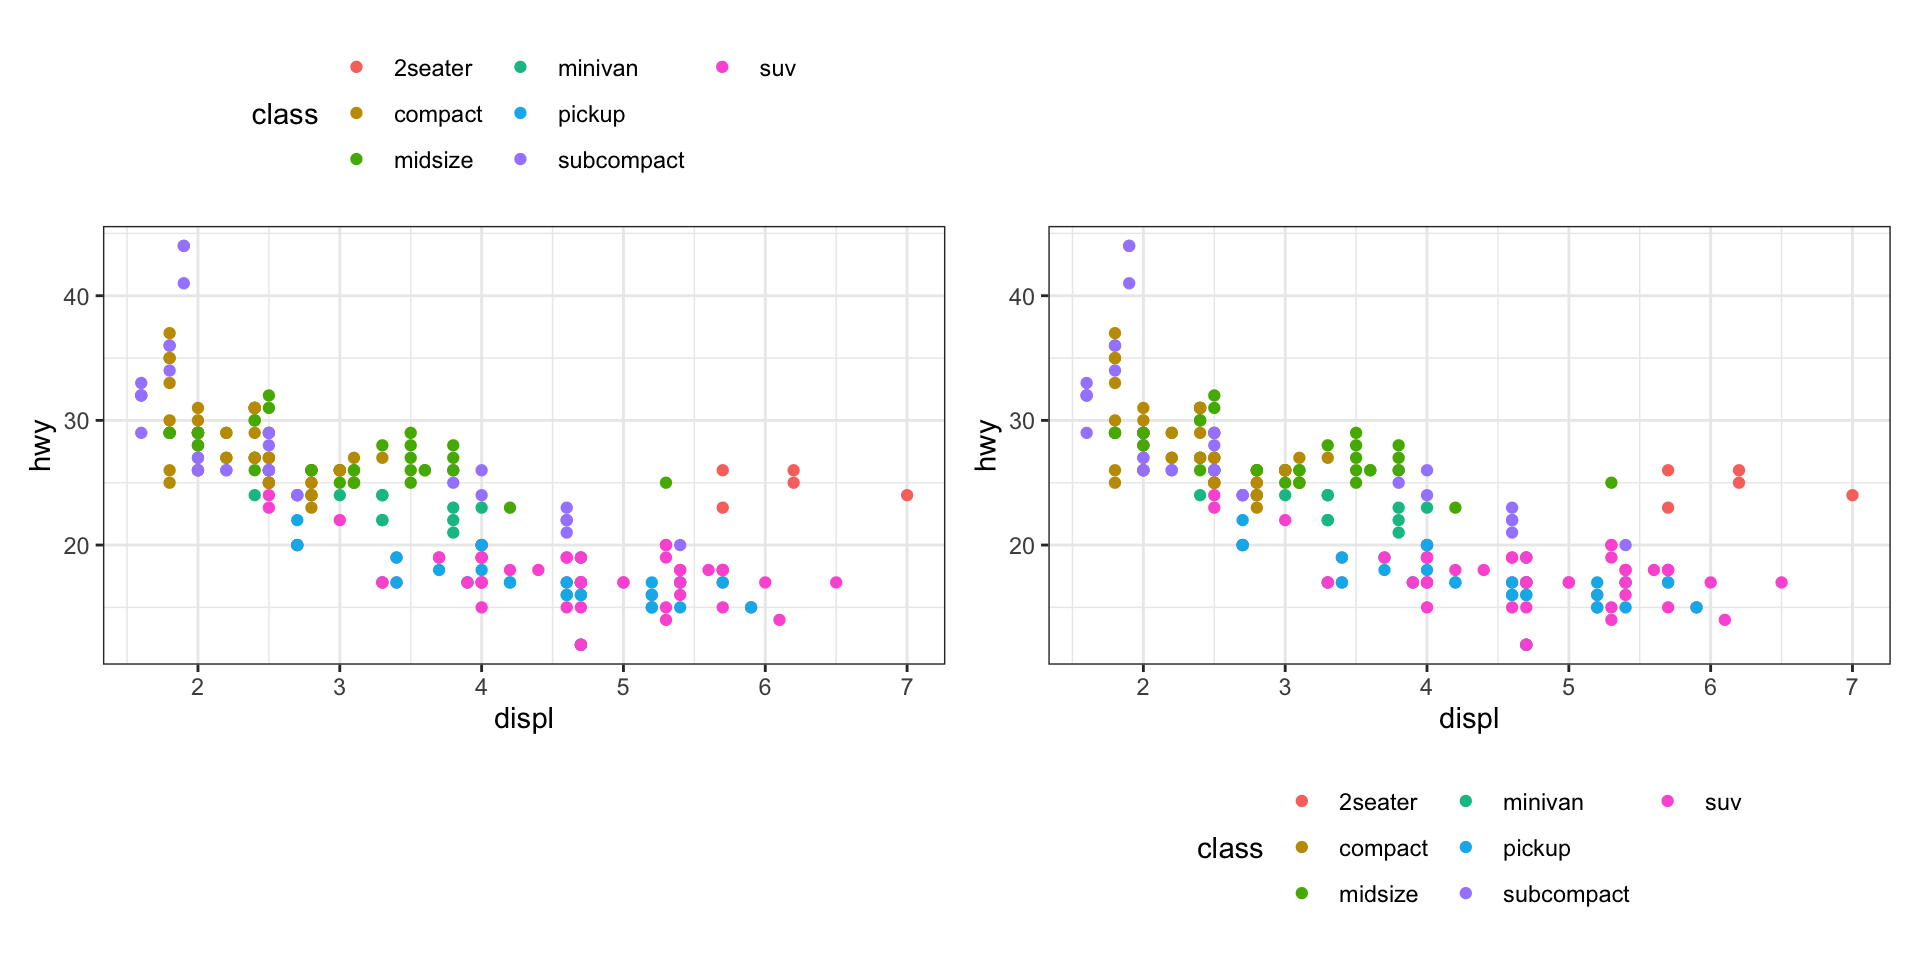 Four scatterplots of highway fuel efficiency versus engine size of cars
where points are colored based on class of car. Clockwise, the legend
is placed on the right, left, top, and bottom of the plot.